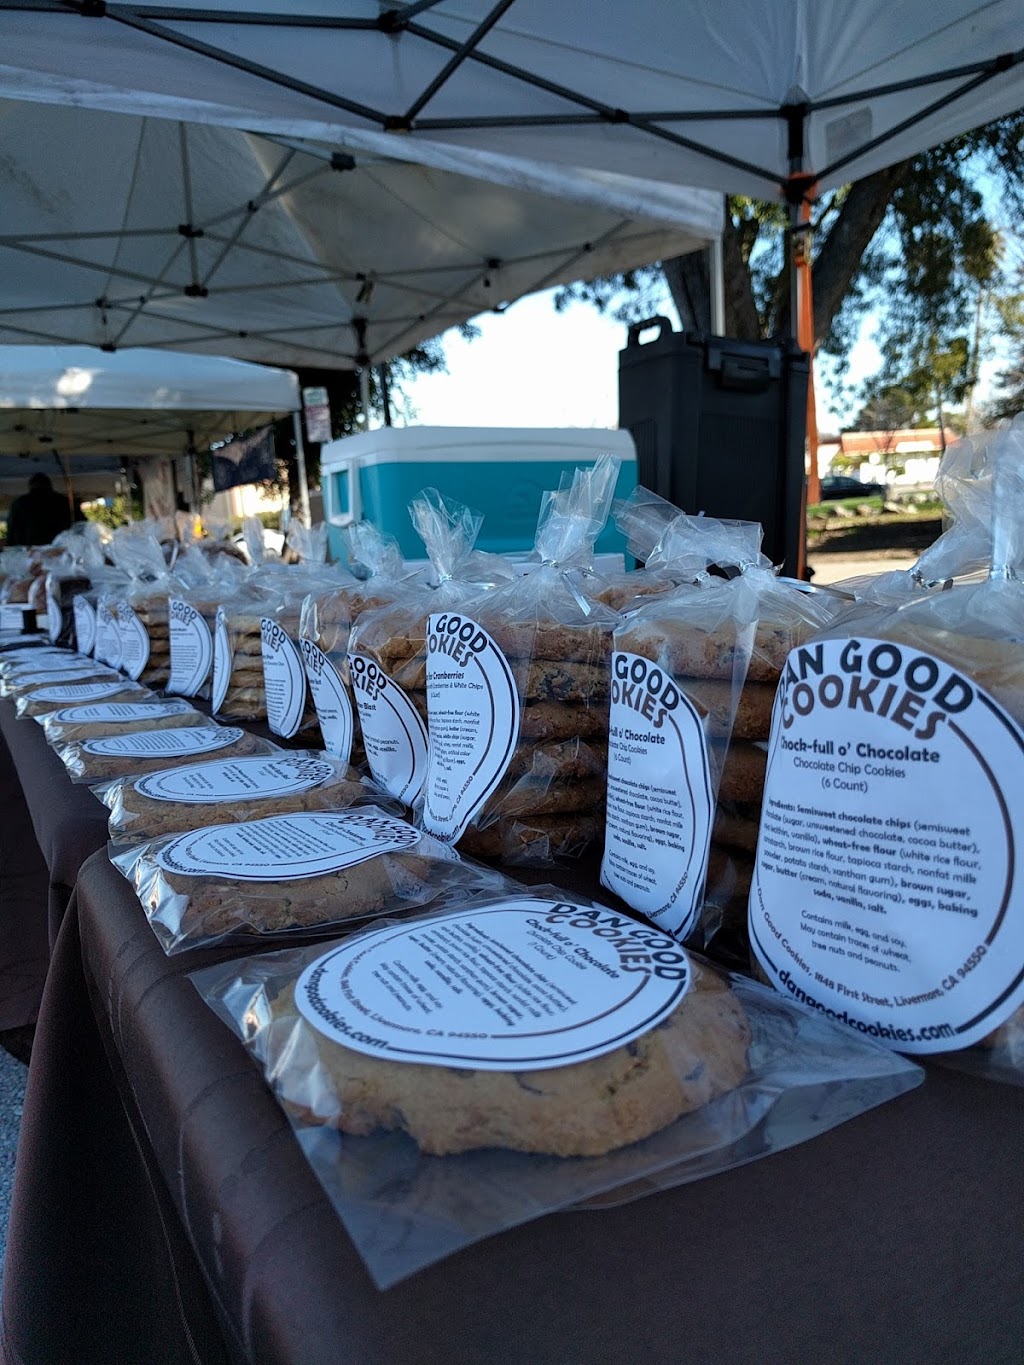 Dan Good Cookies | 2958 Pacific Ave, Livermore, CA 94550, USA | Phone: (925) 623-6757